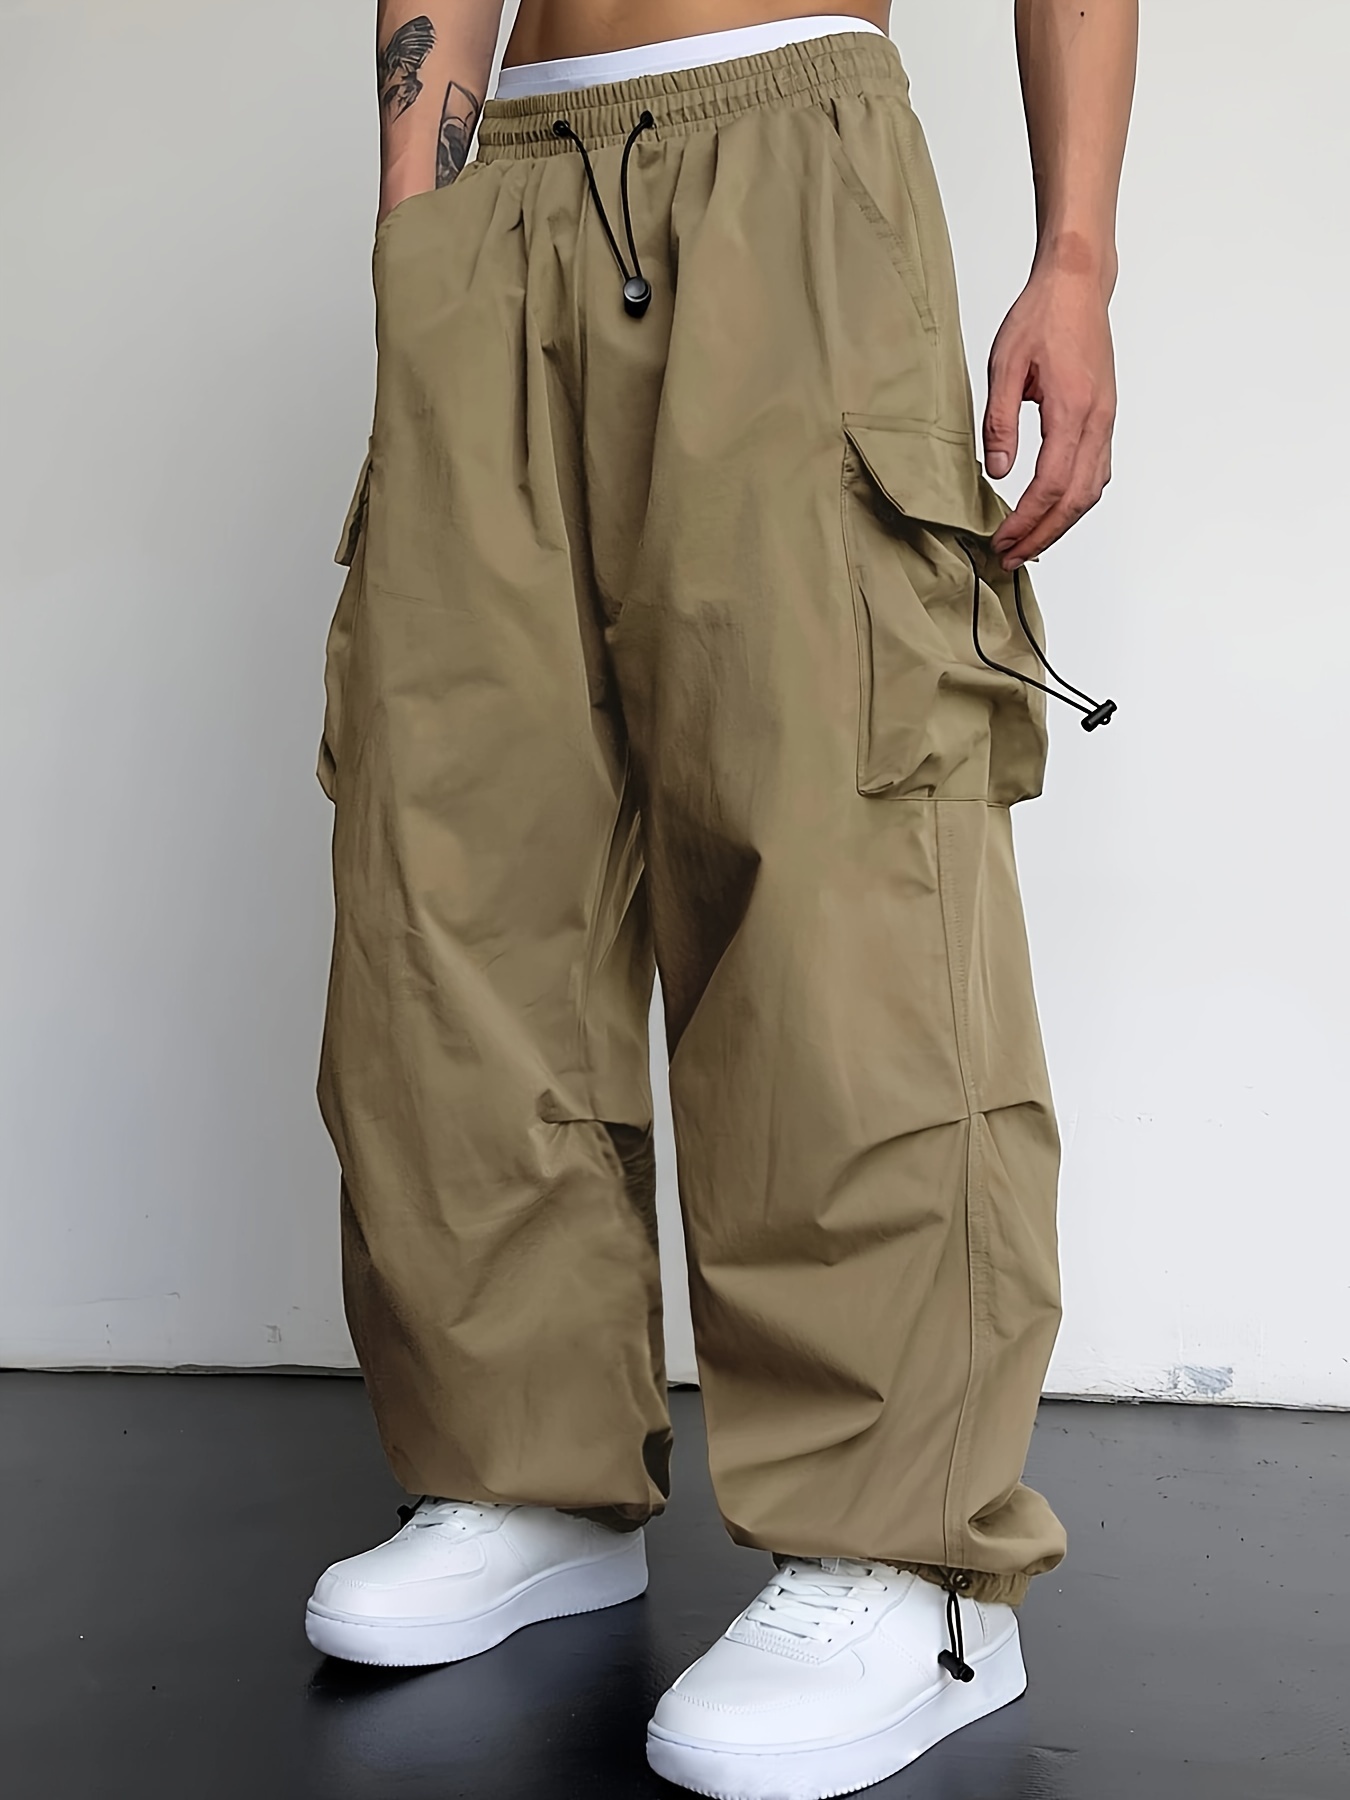 Fall Winter Casual Baggy Corduroy Pants for Men Hip Hop Wide Leg Loose  Elastic Waist Baggy Solid Trousers